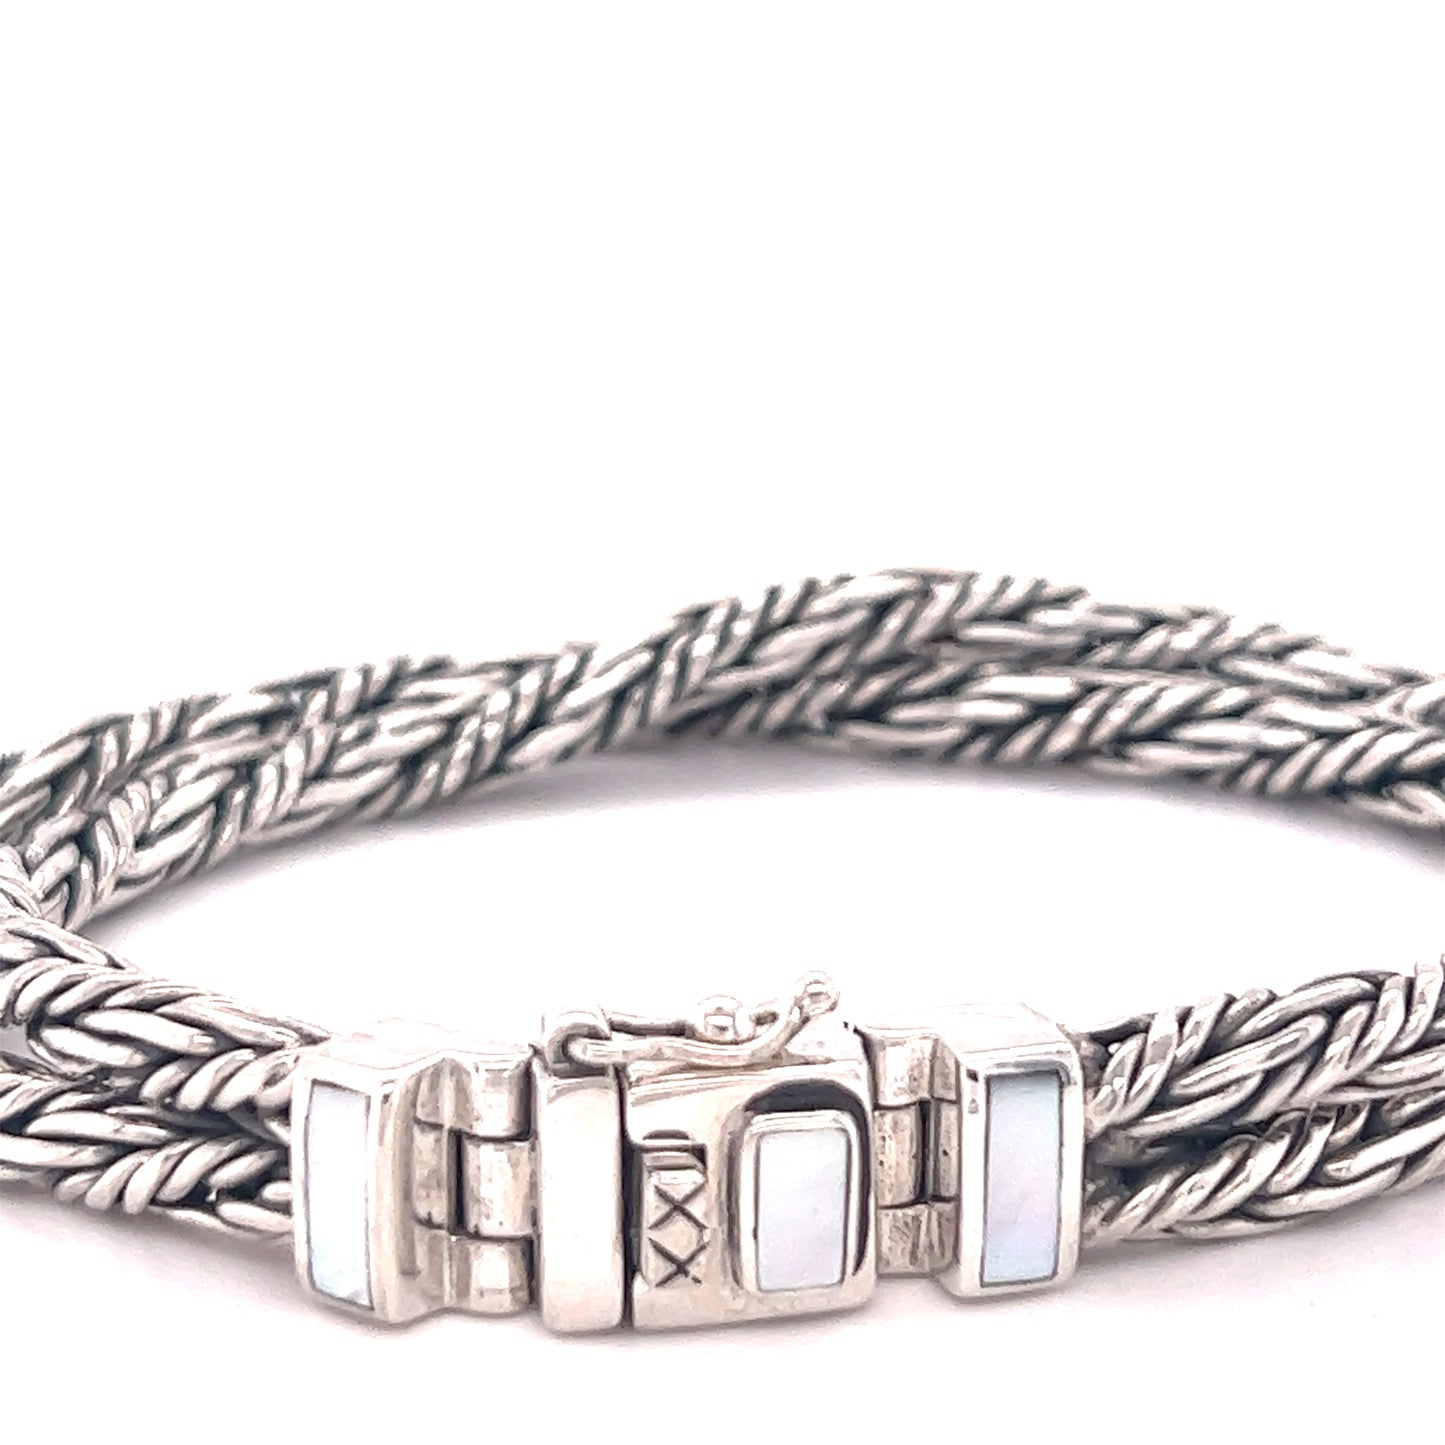 A Super Silver double twisted braided rope bracelet with a mother of pearl clasp.